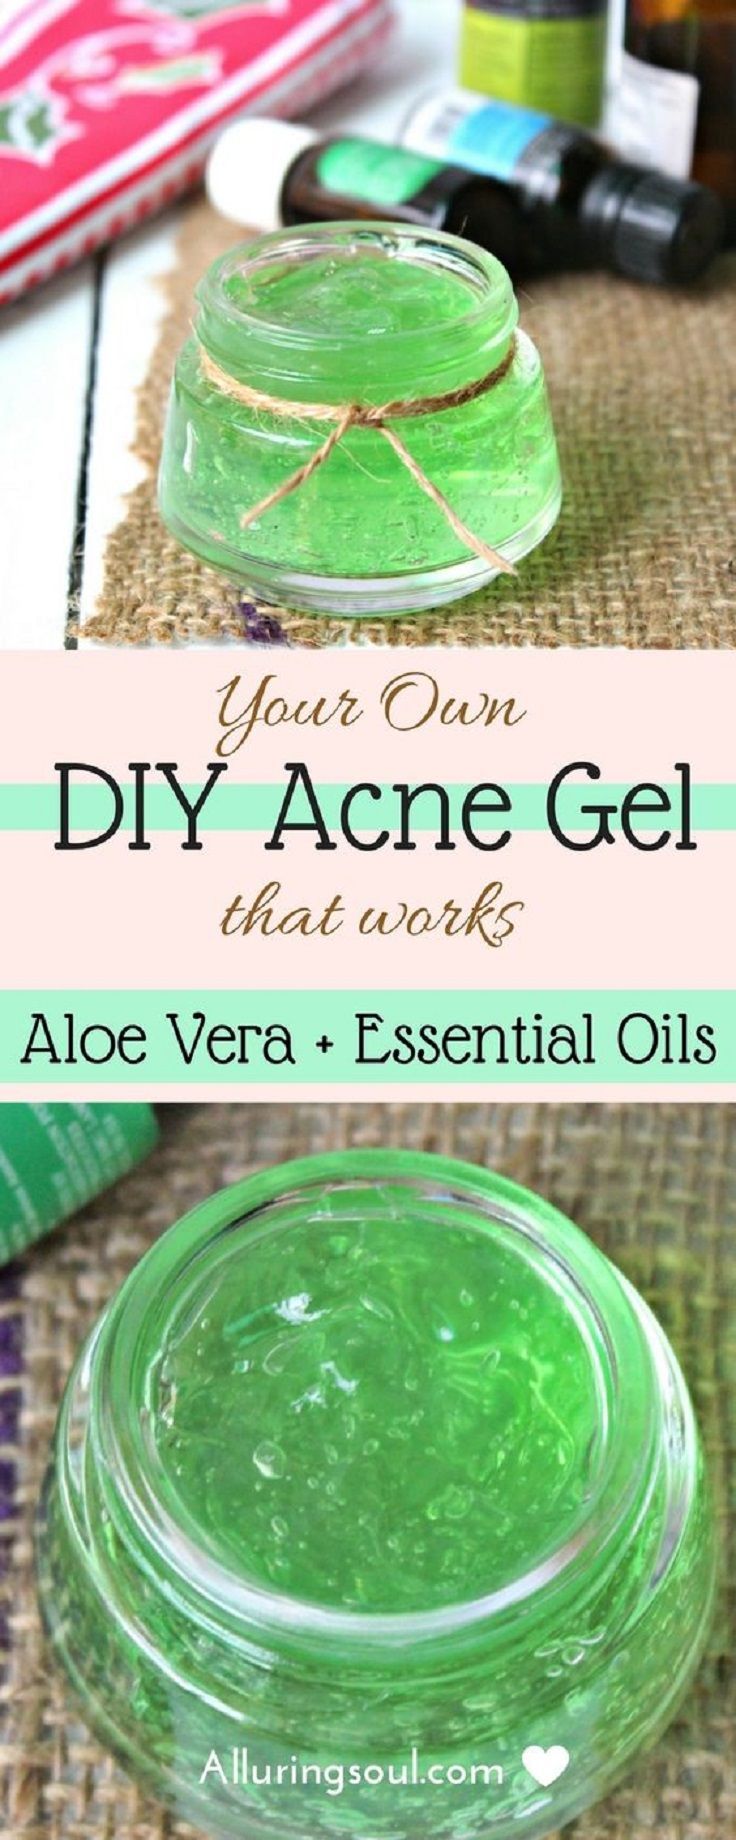 Aloe Vera and Essential Oil DIY Acne Gel That Works - 16 Must-Have DIY Beauty Recipes To Keep You Beautiful All Year Long -   24 diy makeup products
 ideas